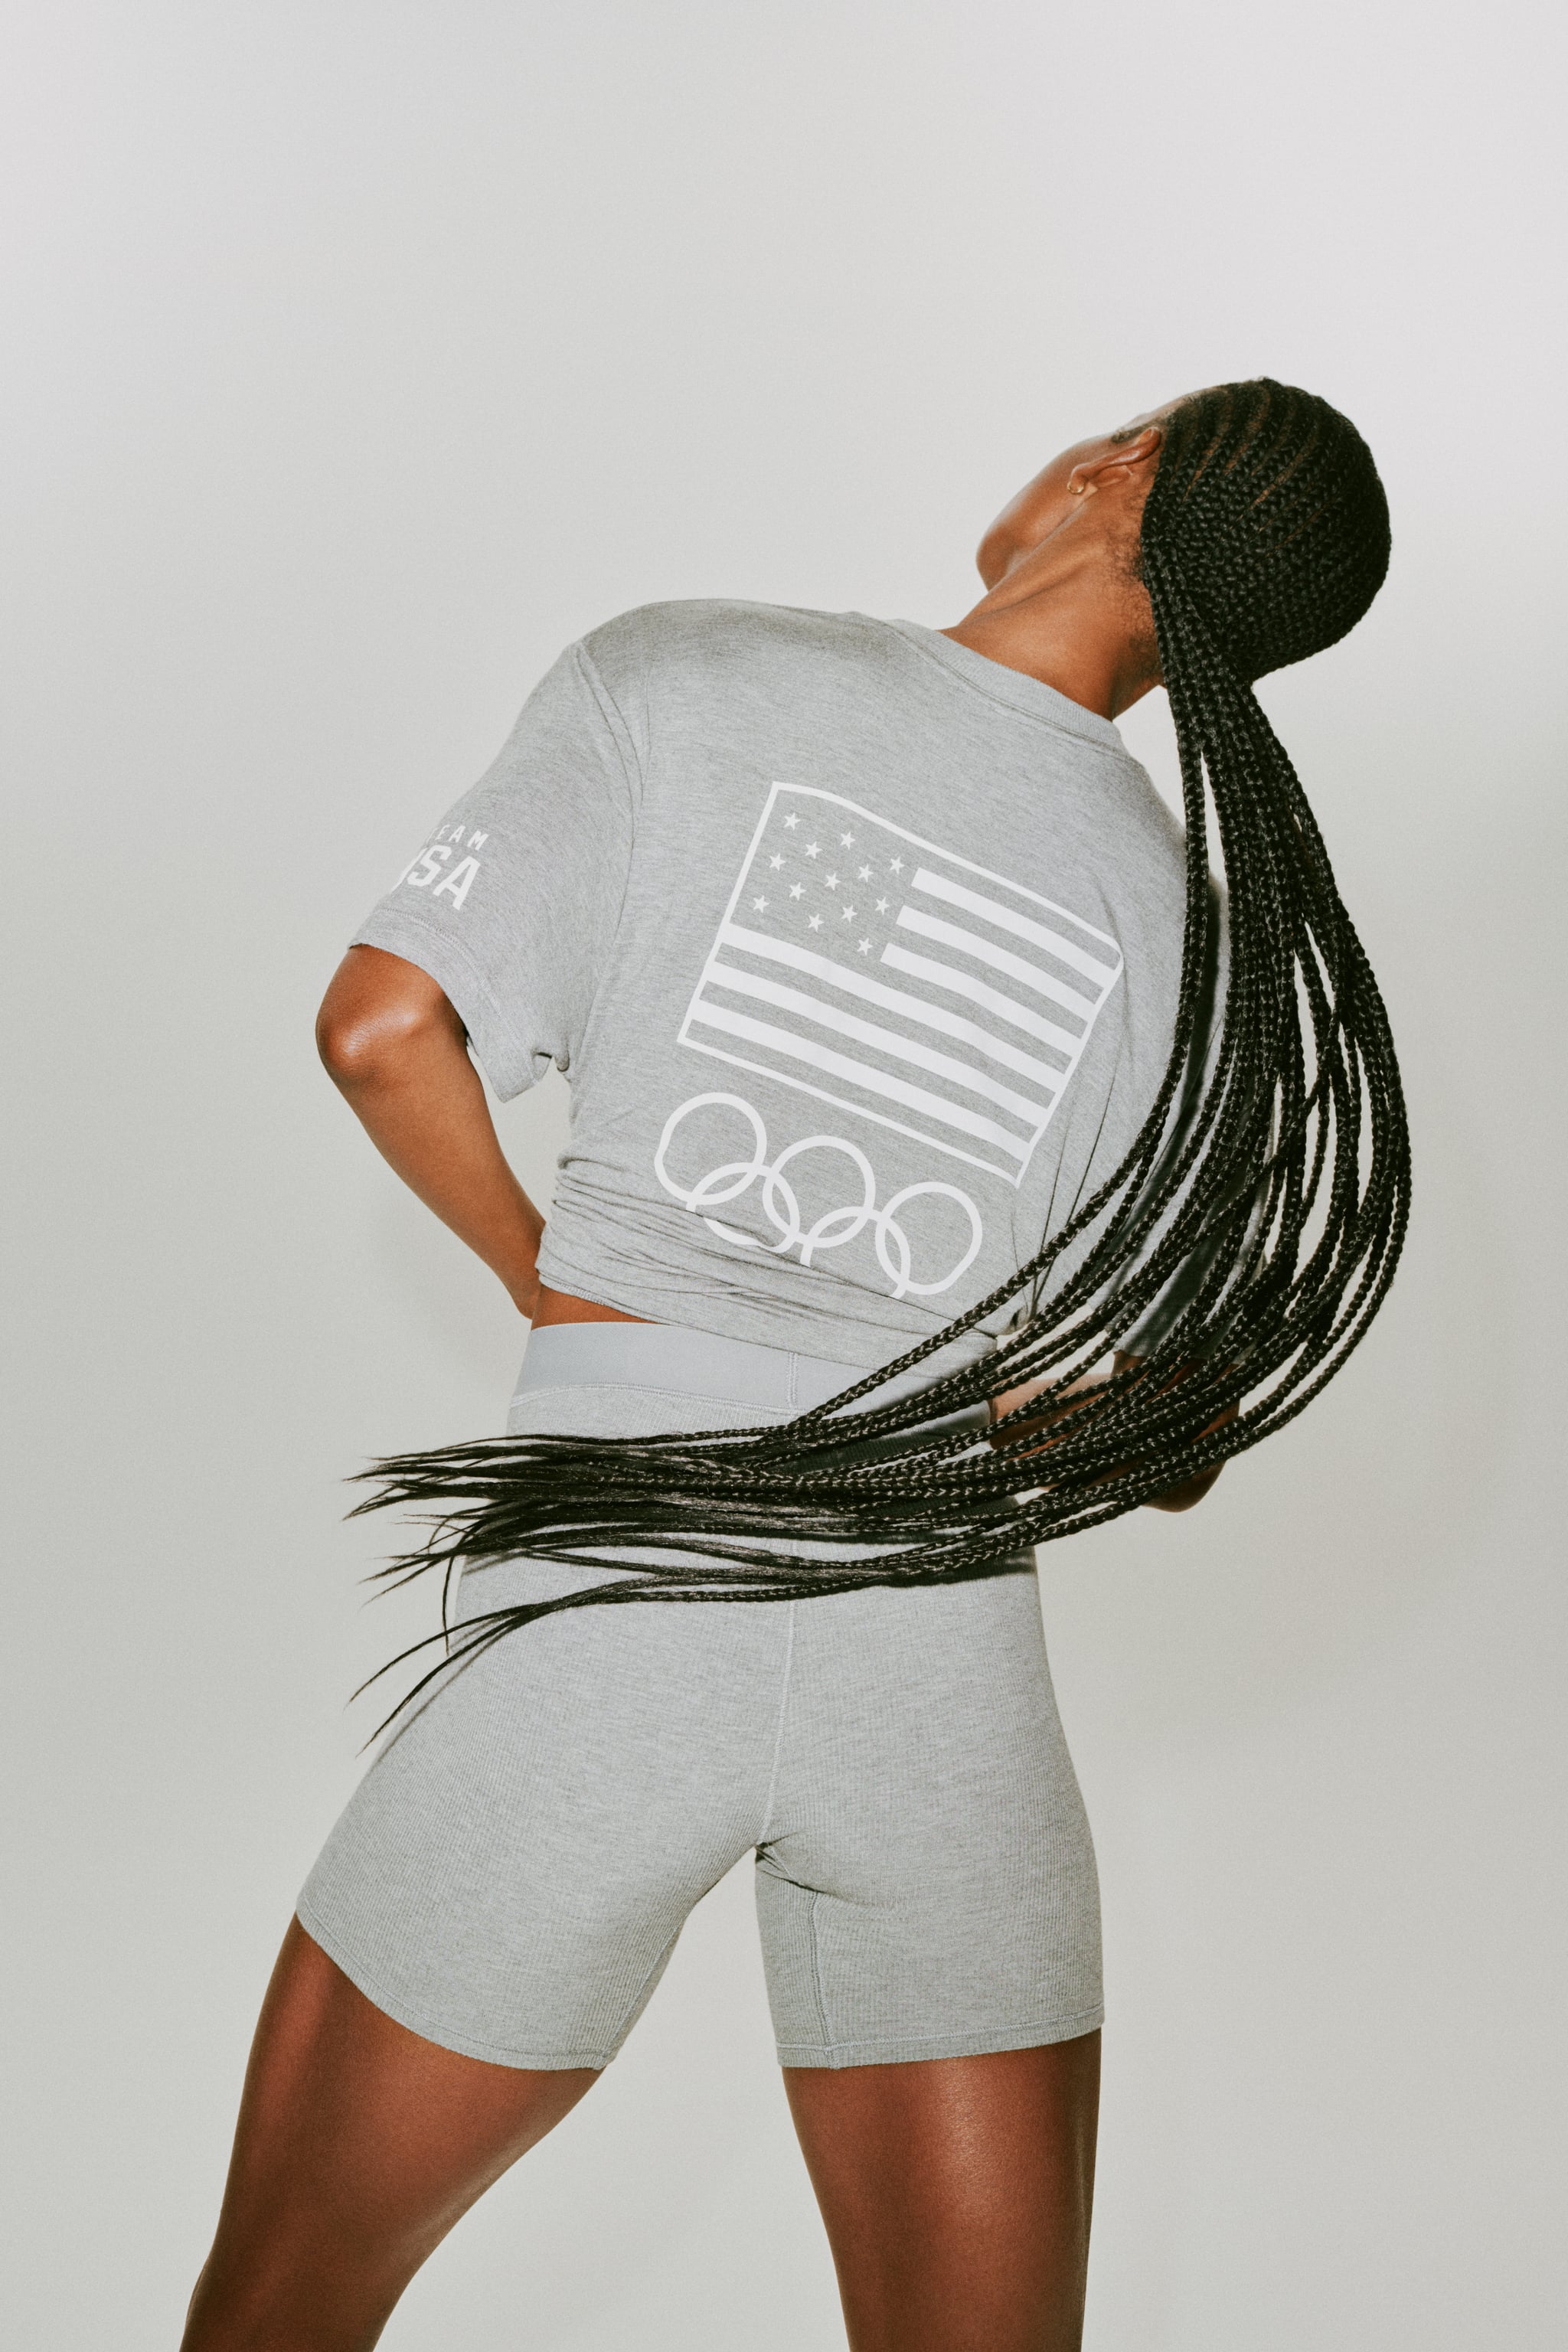 Skims Olympic Loungewear: See the Campaign and Shop the Line